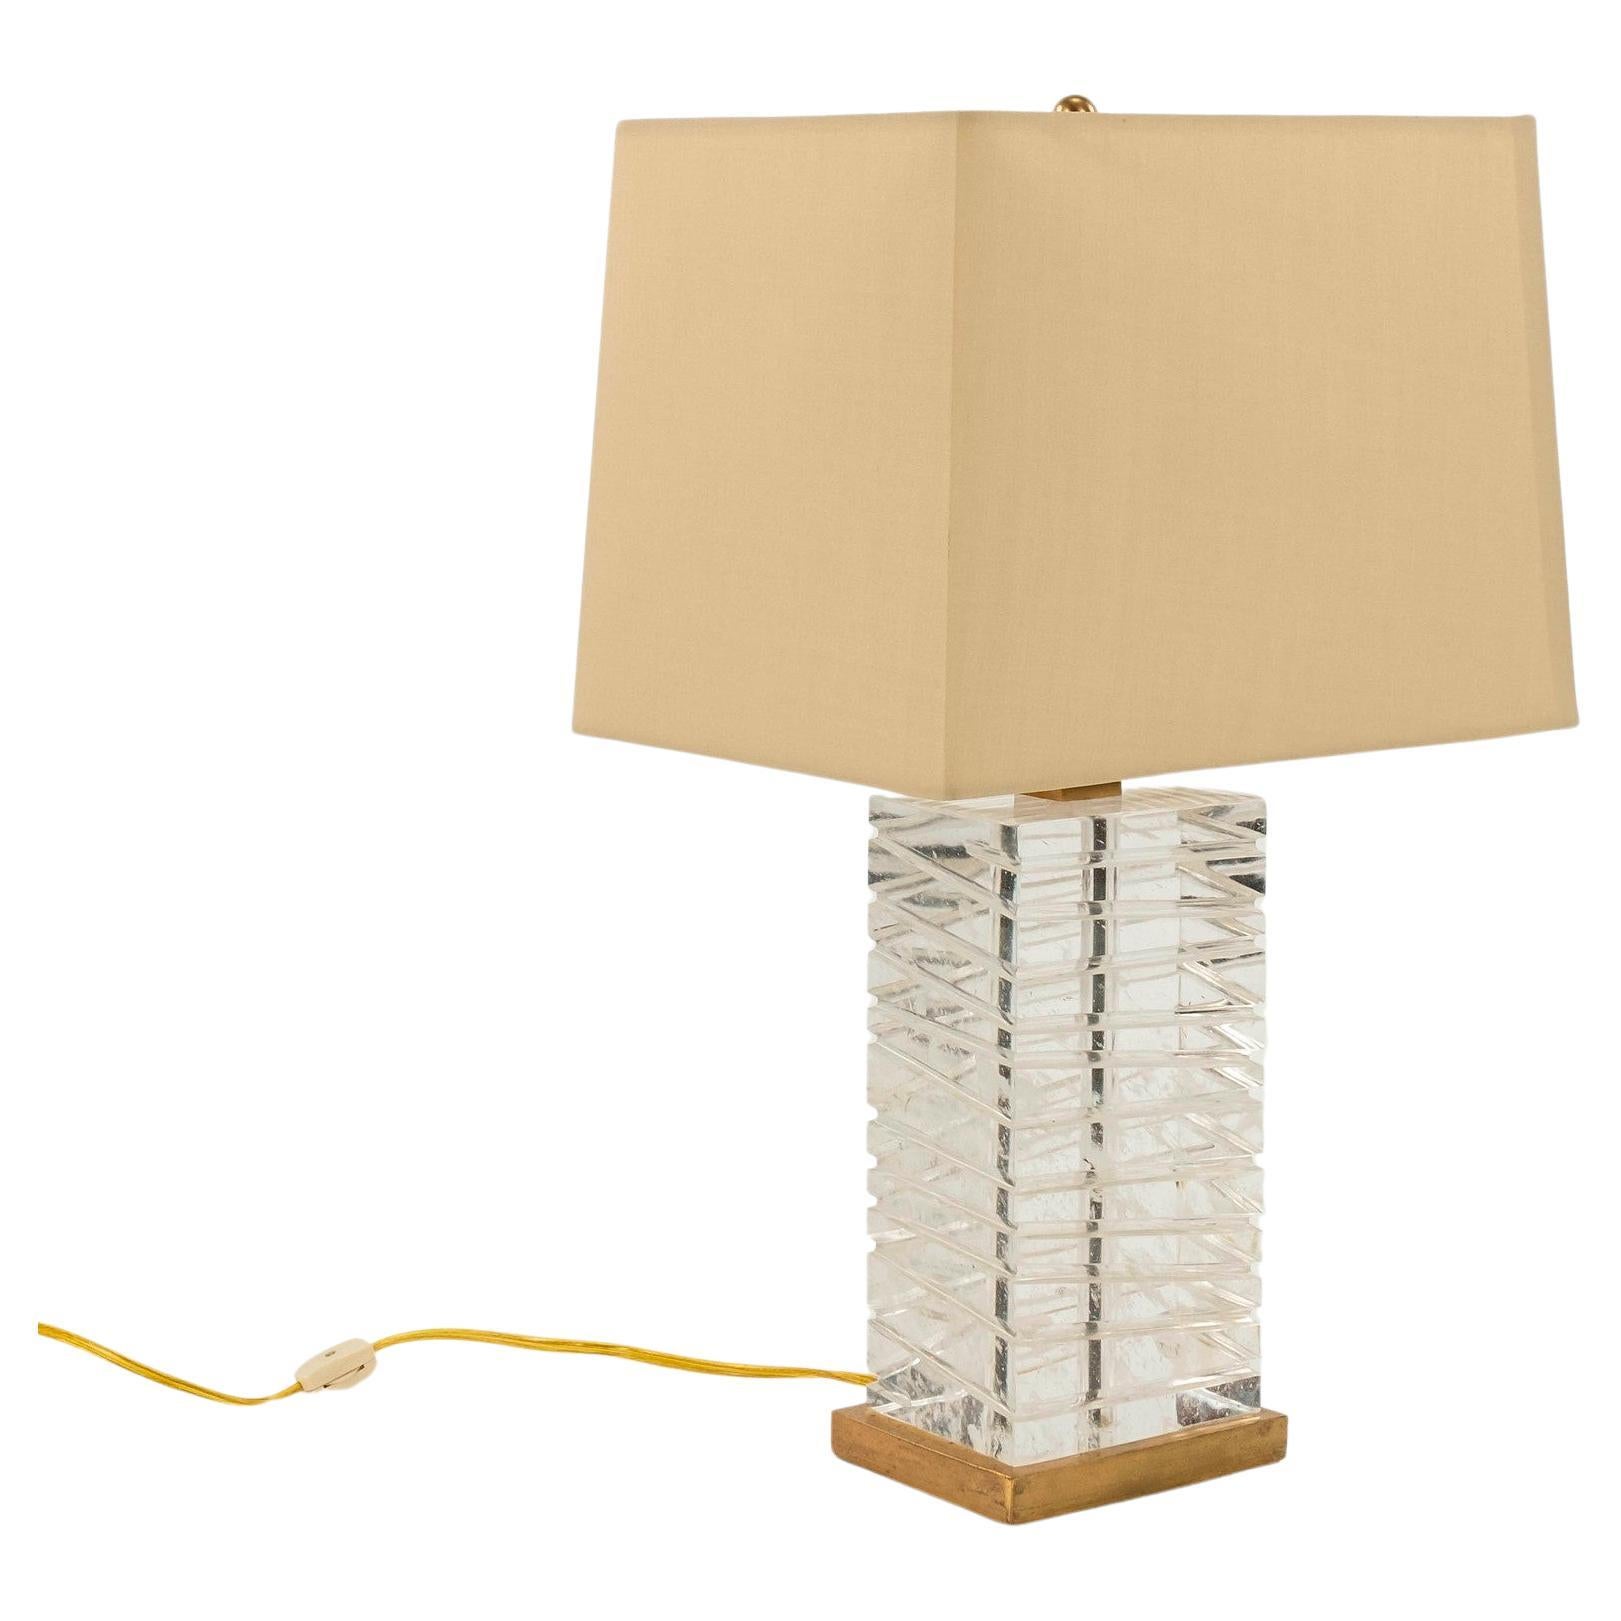 Robert Kuo Rock Crystal Table Lamp For Sale